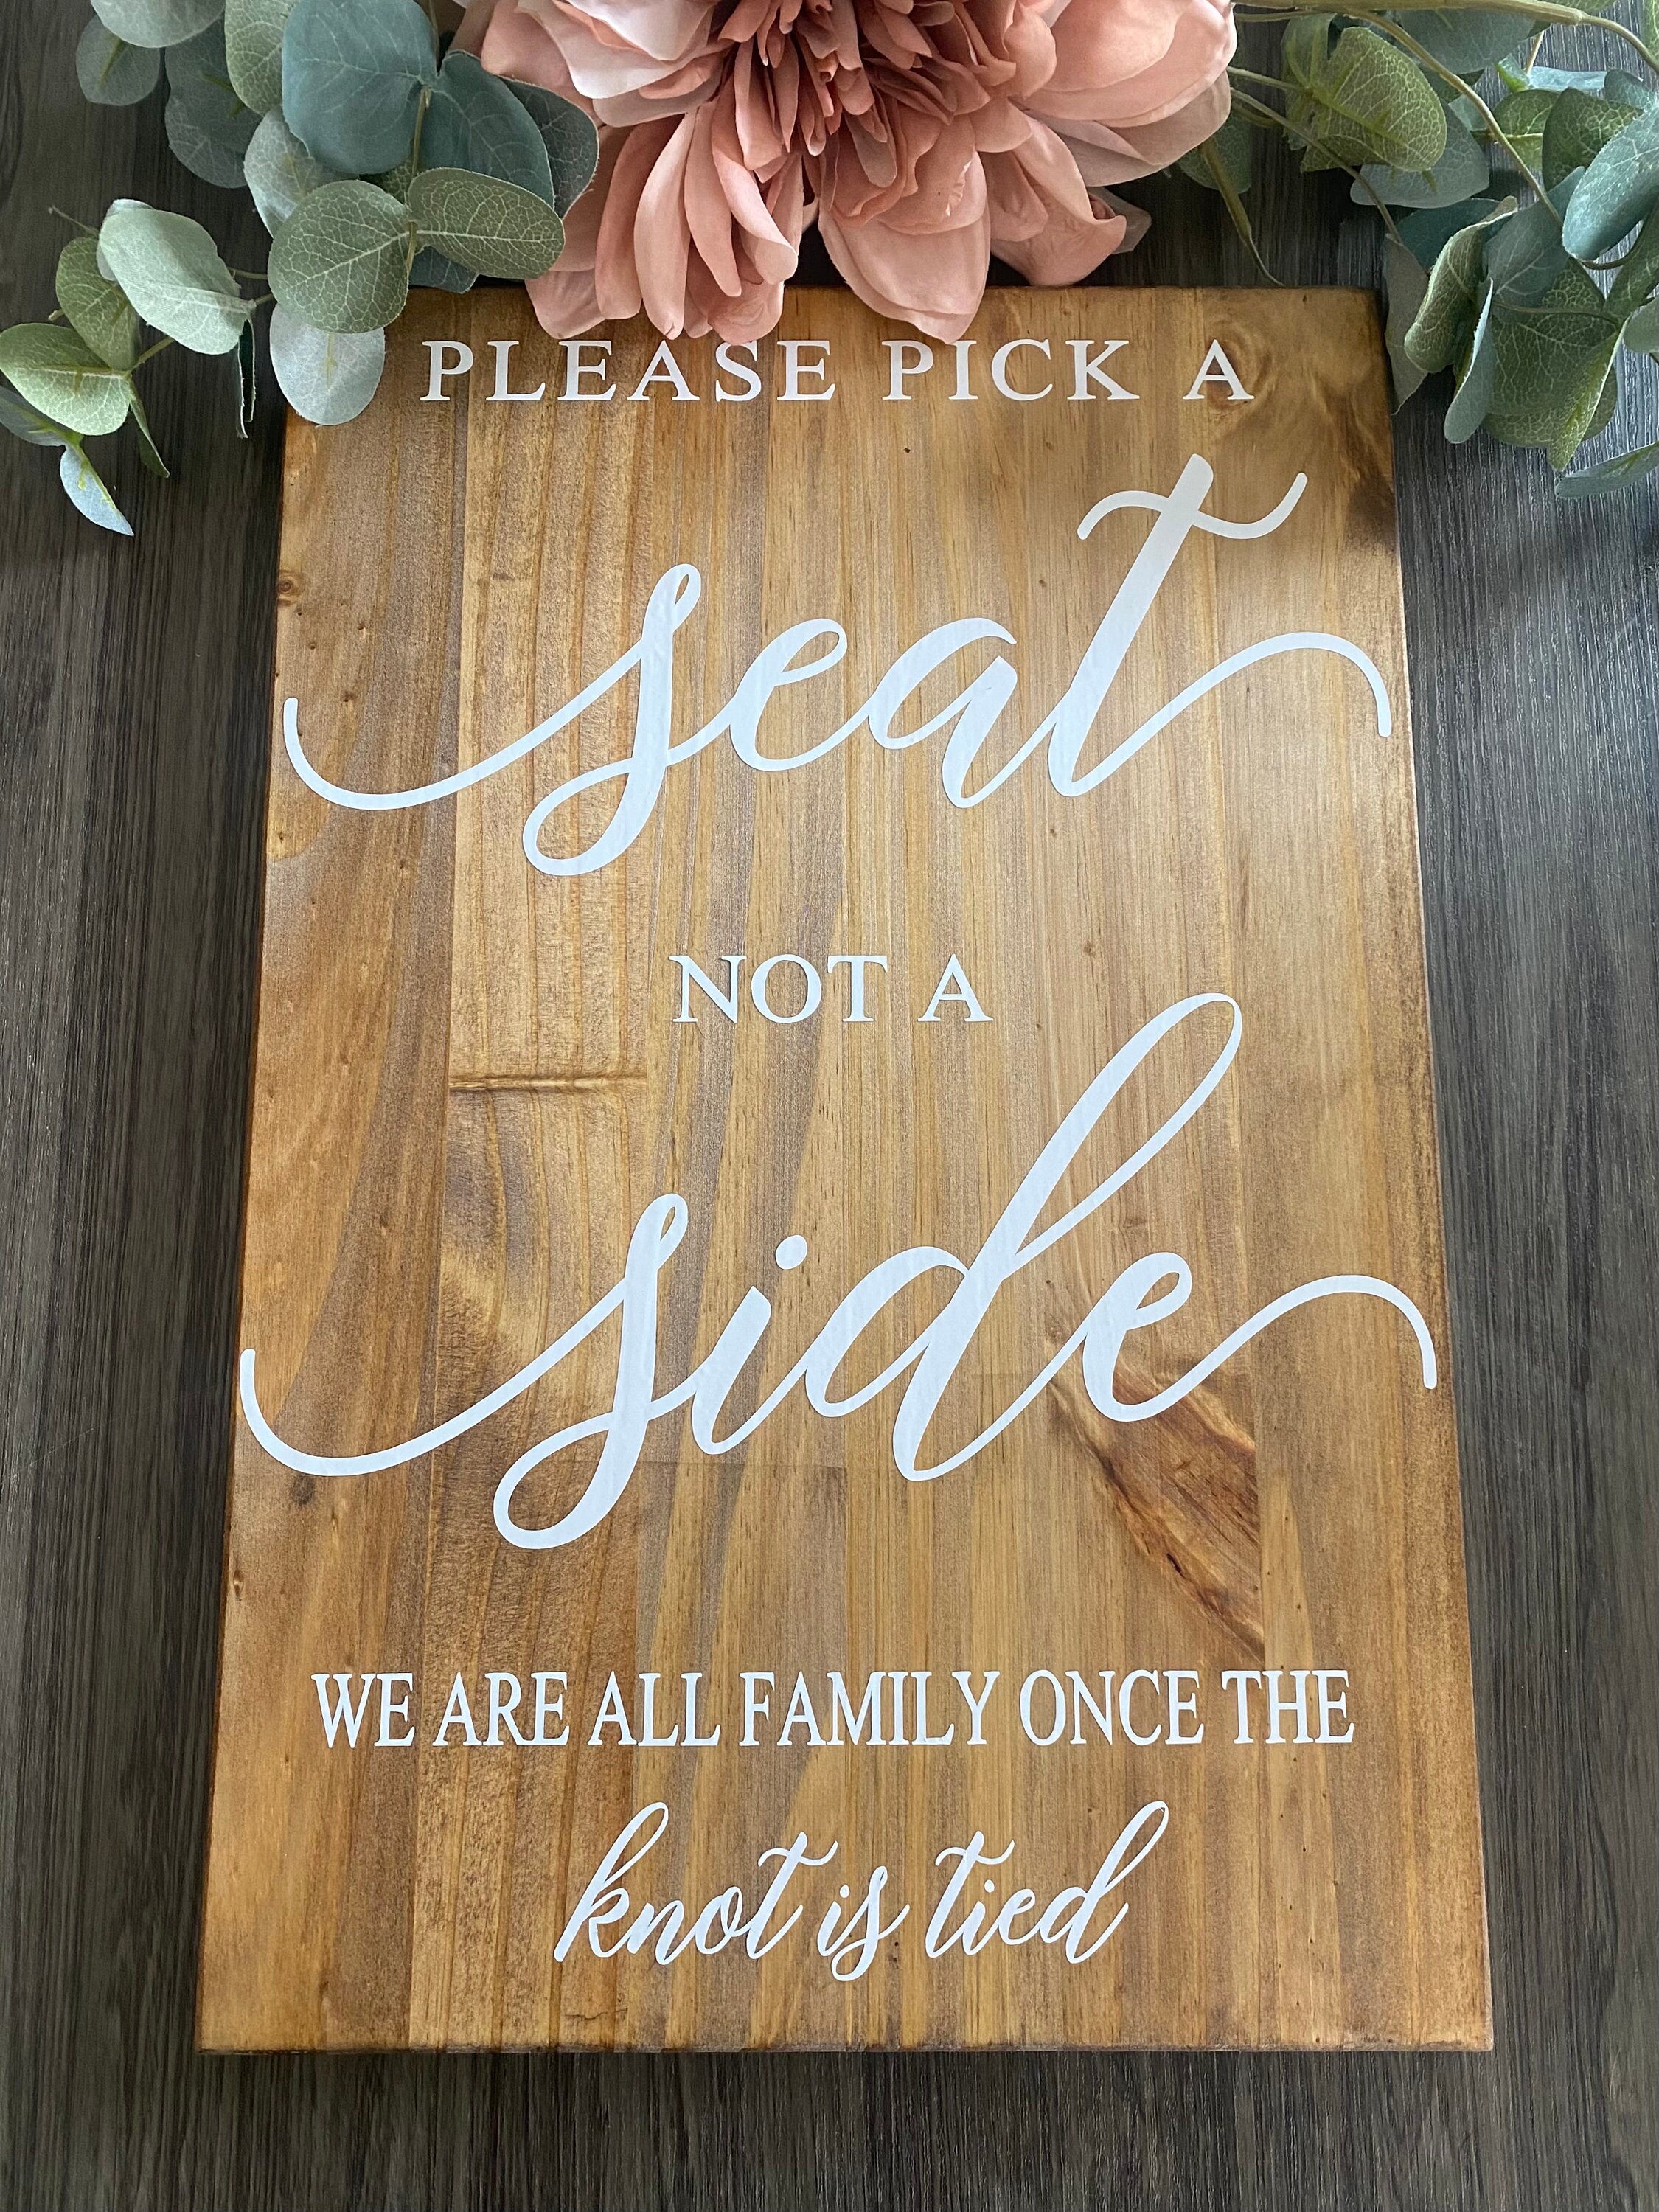 Rustic Wood Wedding Sign Stickers Pick A Seat Not A Side Country Wedding  Decoration Vinyl diy Wall Decals for Board Glass S427 - AliExpress